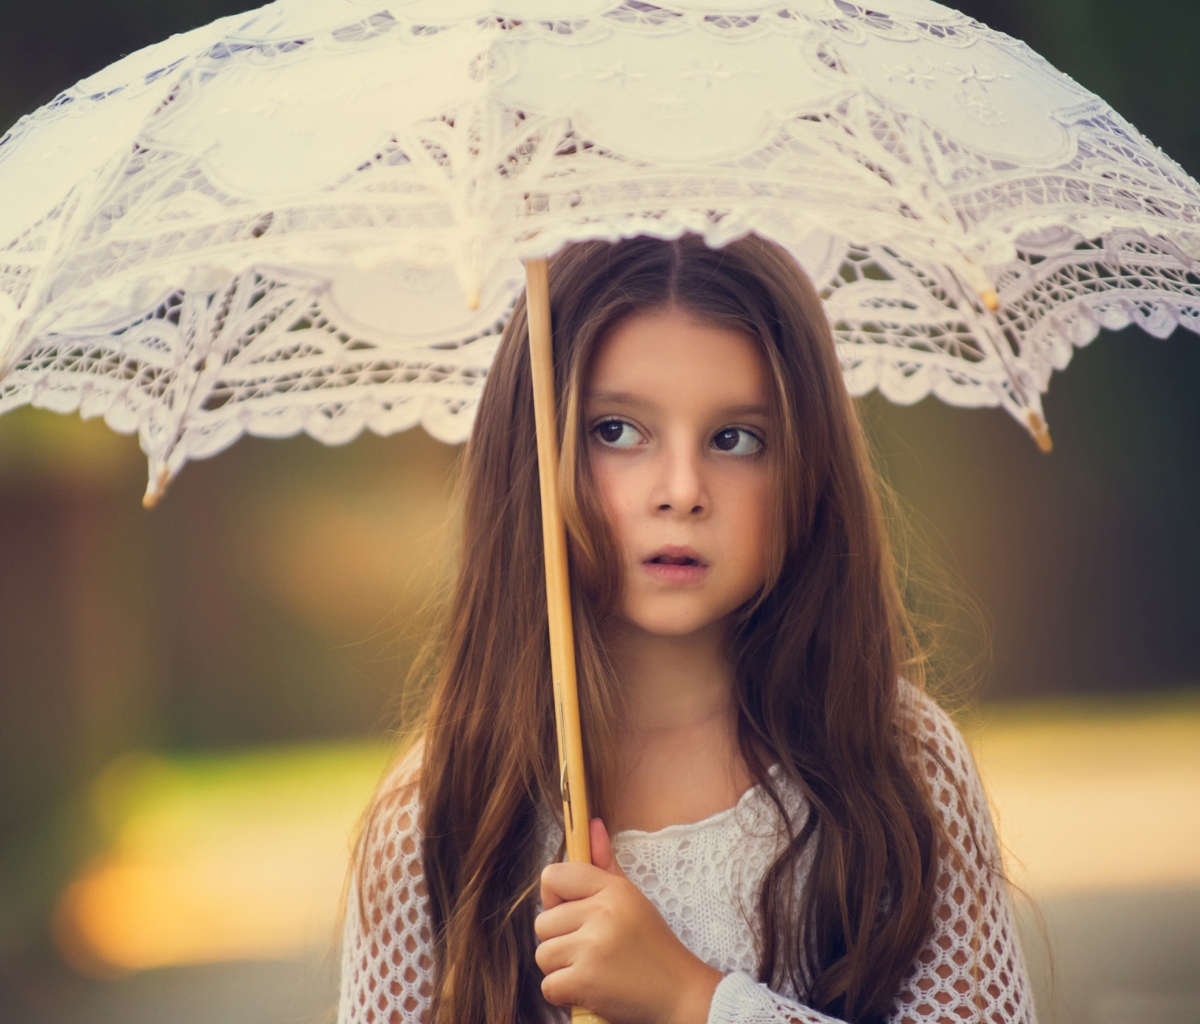 Girl With Lace Umbrella wallpaper 1200x1024